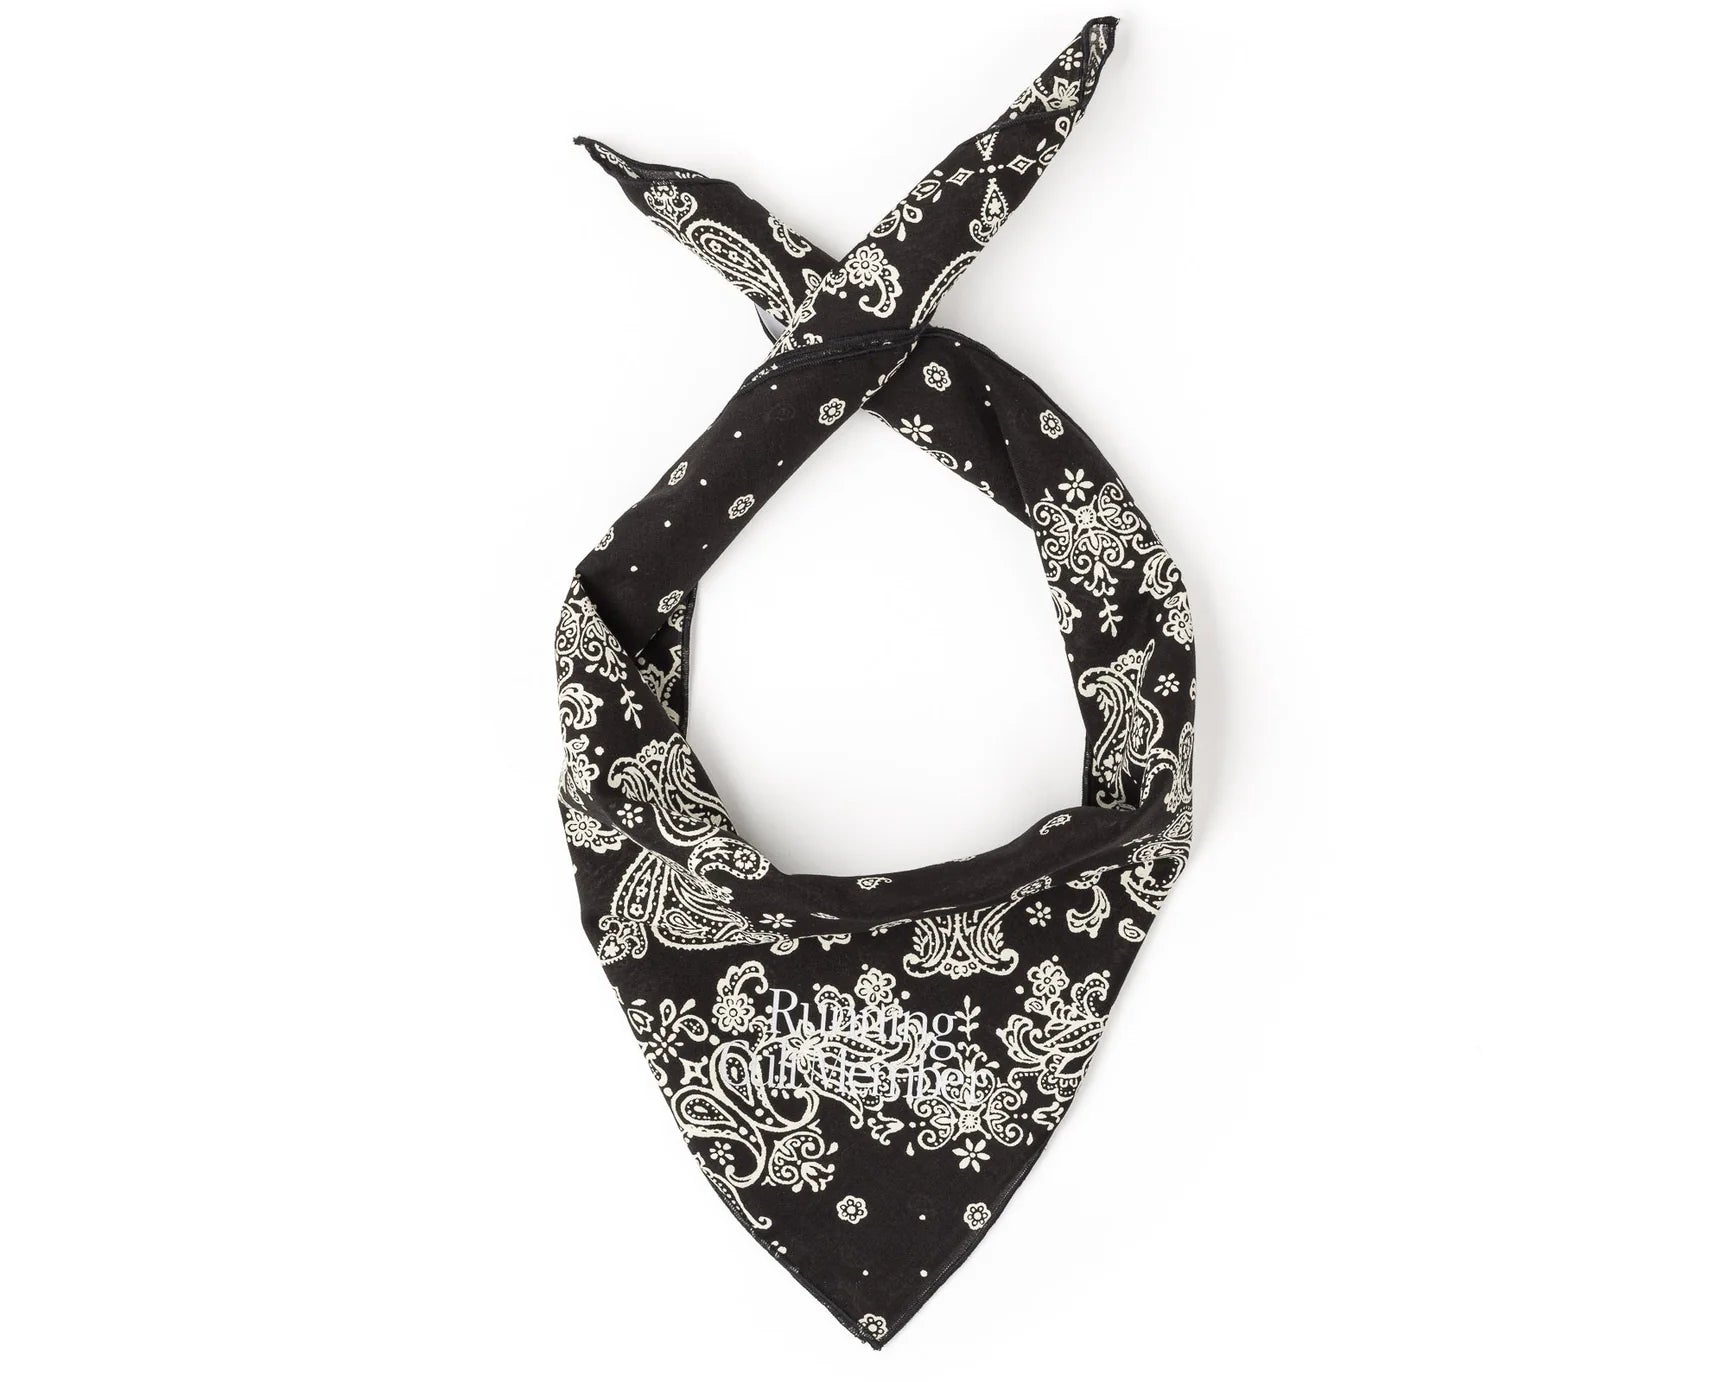 SATISFY - SoftCell™ Bandana - Black - Space Camp